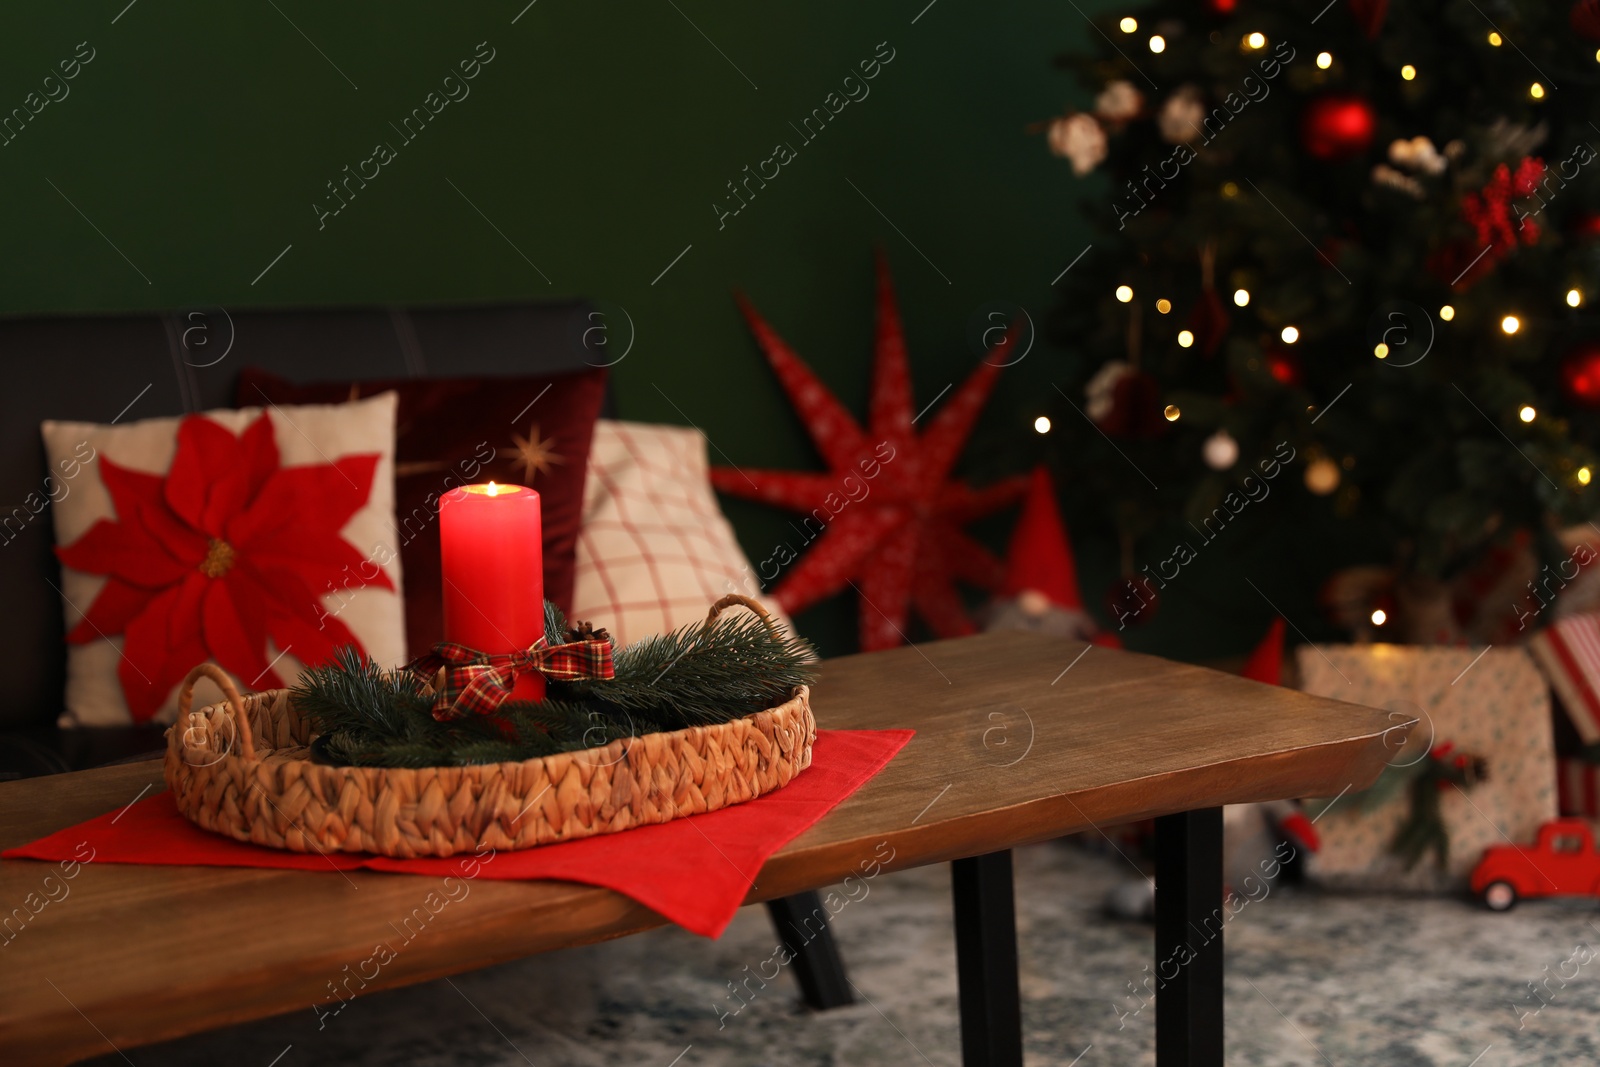 Photo of Wicker tray with red candle and fir branches on wooden table indoors, space for text. Christmas decor